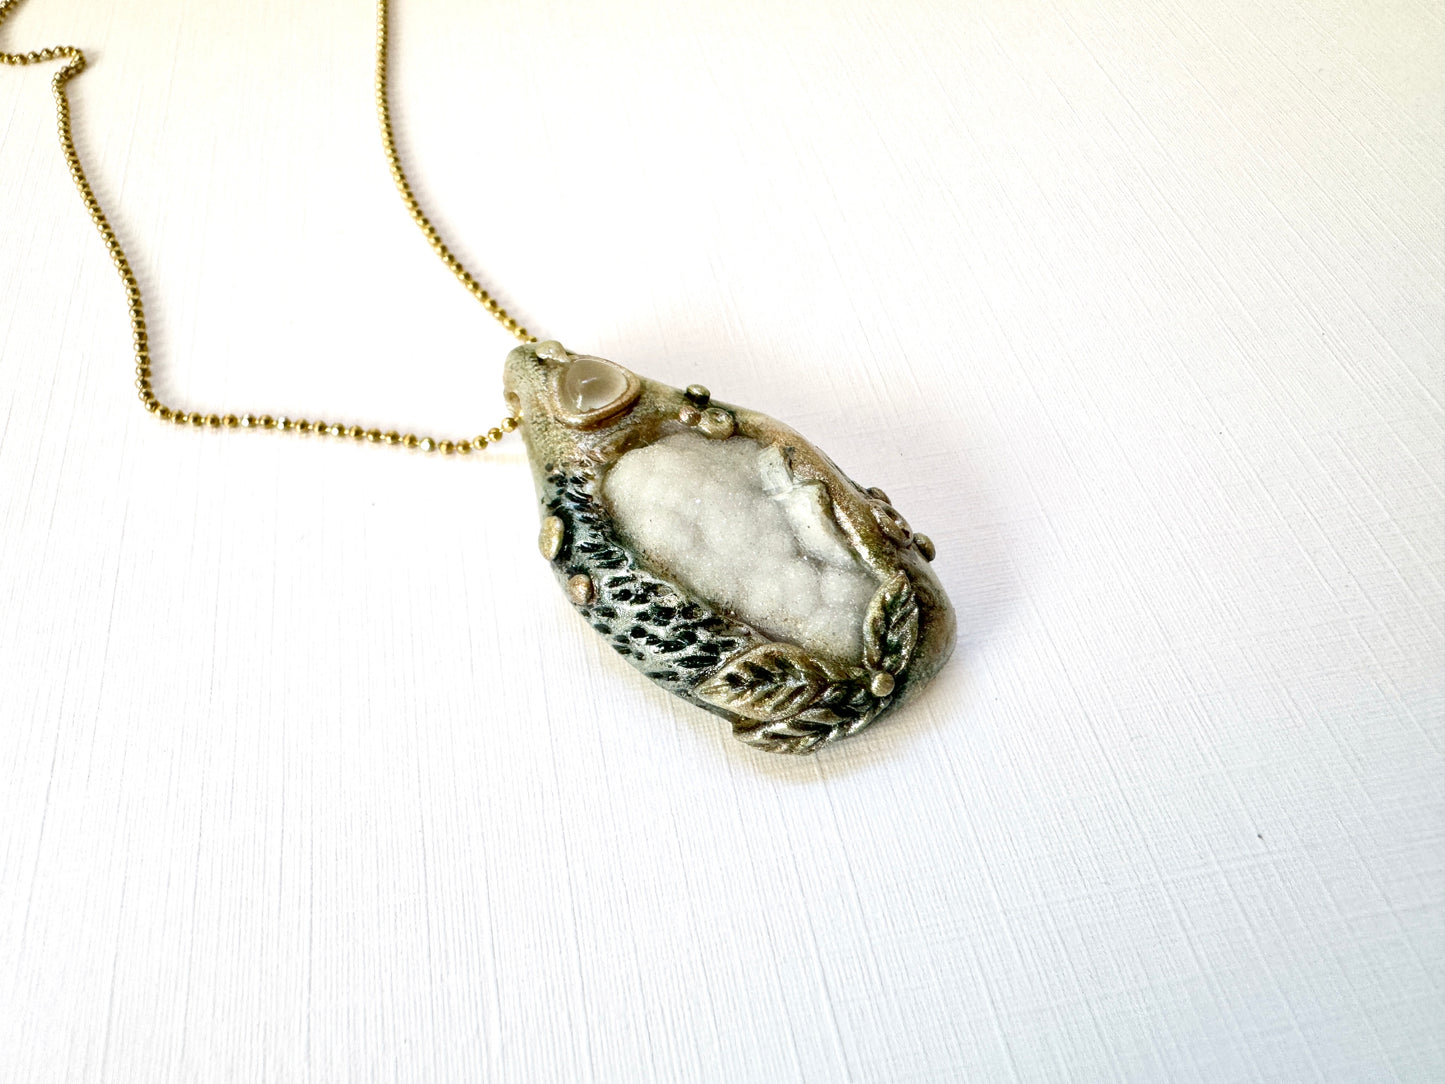 Shimmering Woodland Necklace - Chalcedony, Quartz and Moonstone